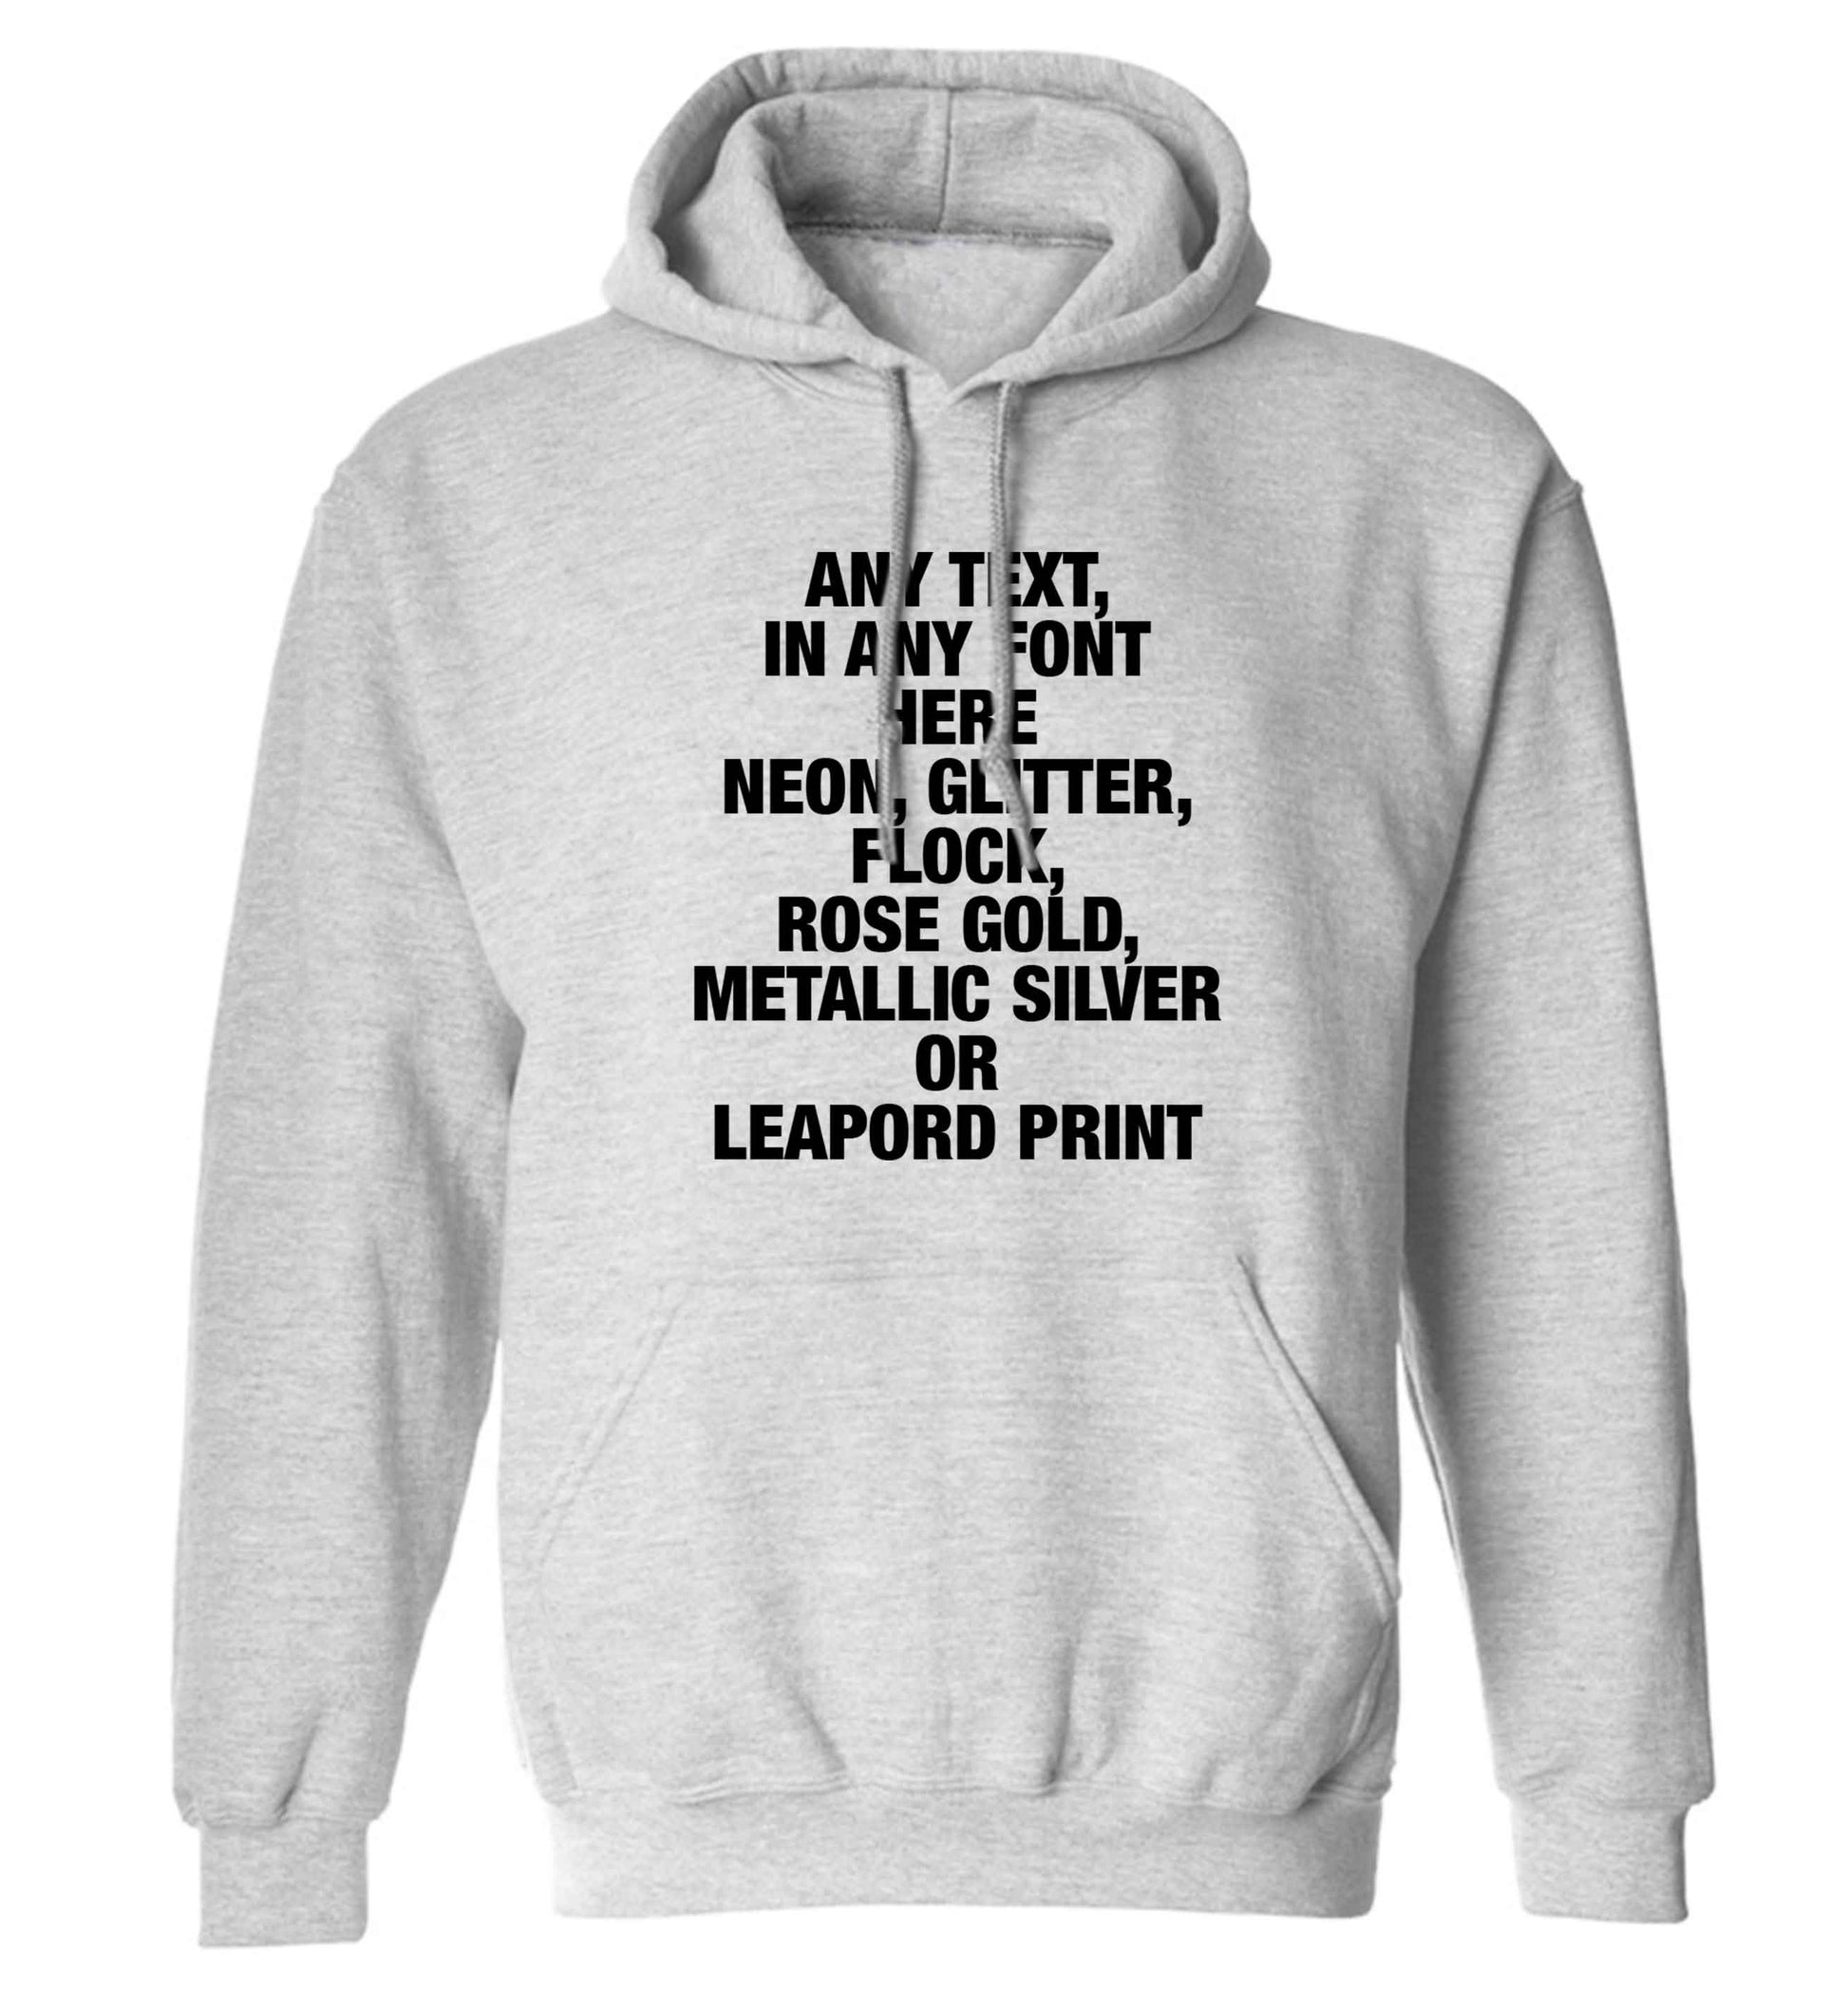 Premium custom order any text colour and font adults unisex grey hoodie 2XL